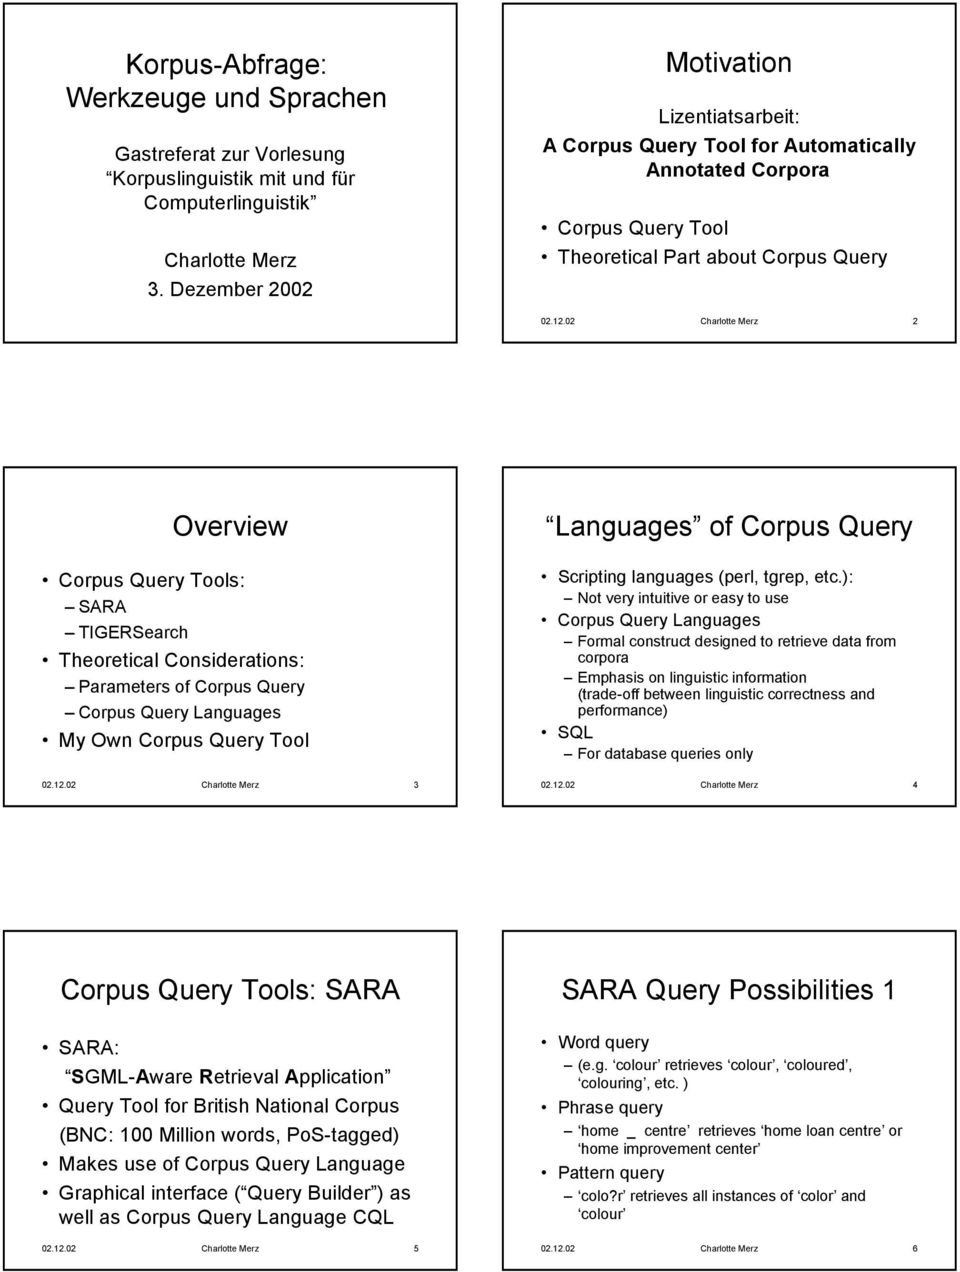 02 Charlotte Merz 2 Overview Corpus Query Tools: SARA Theoretical Considerations: Parameters of Corpus Query Corpus Query Languages My Own Corpus Query Tool Languages of Corpus Query Scripting